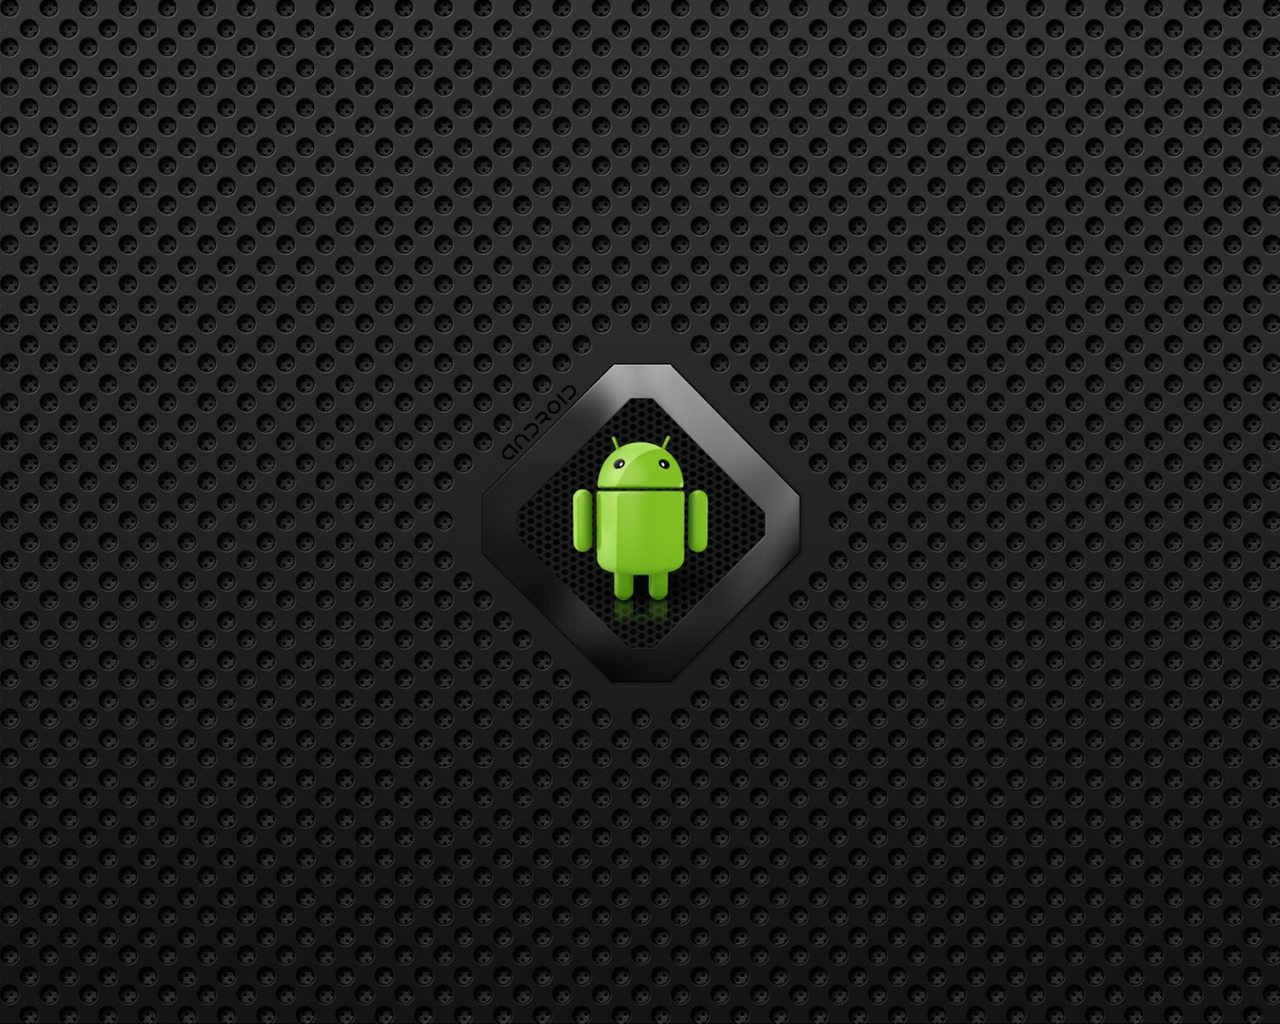 Android Logo for 1280 x 1024 resolution